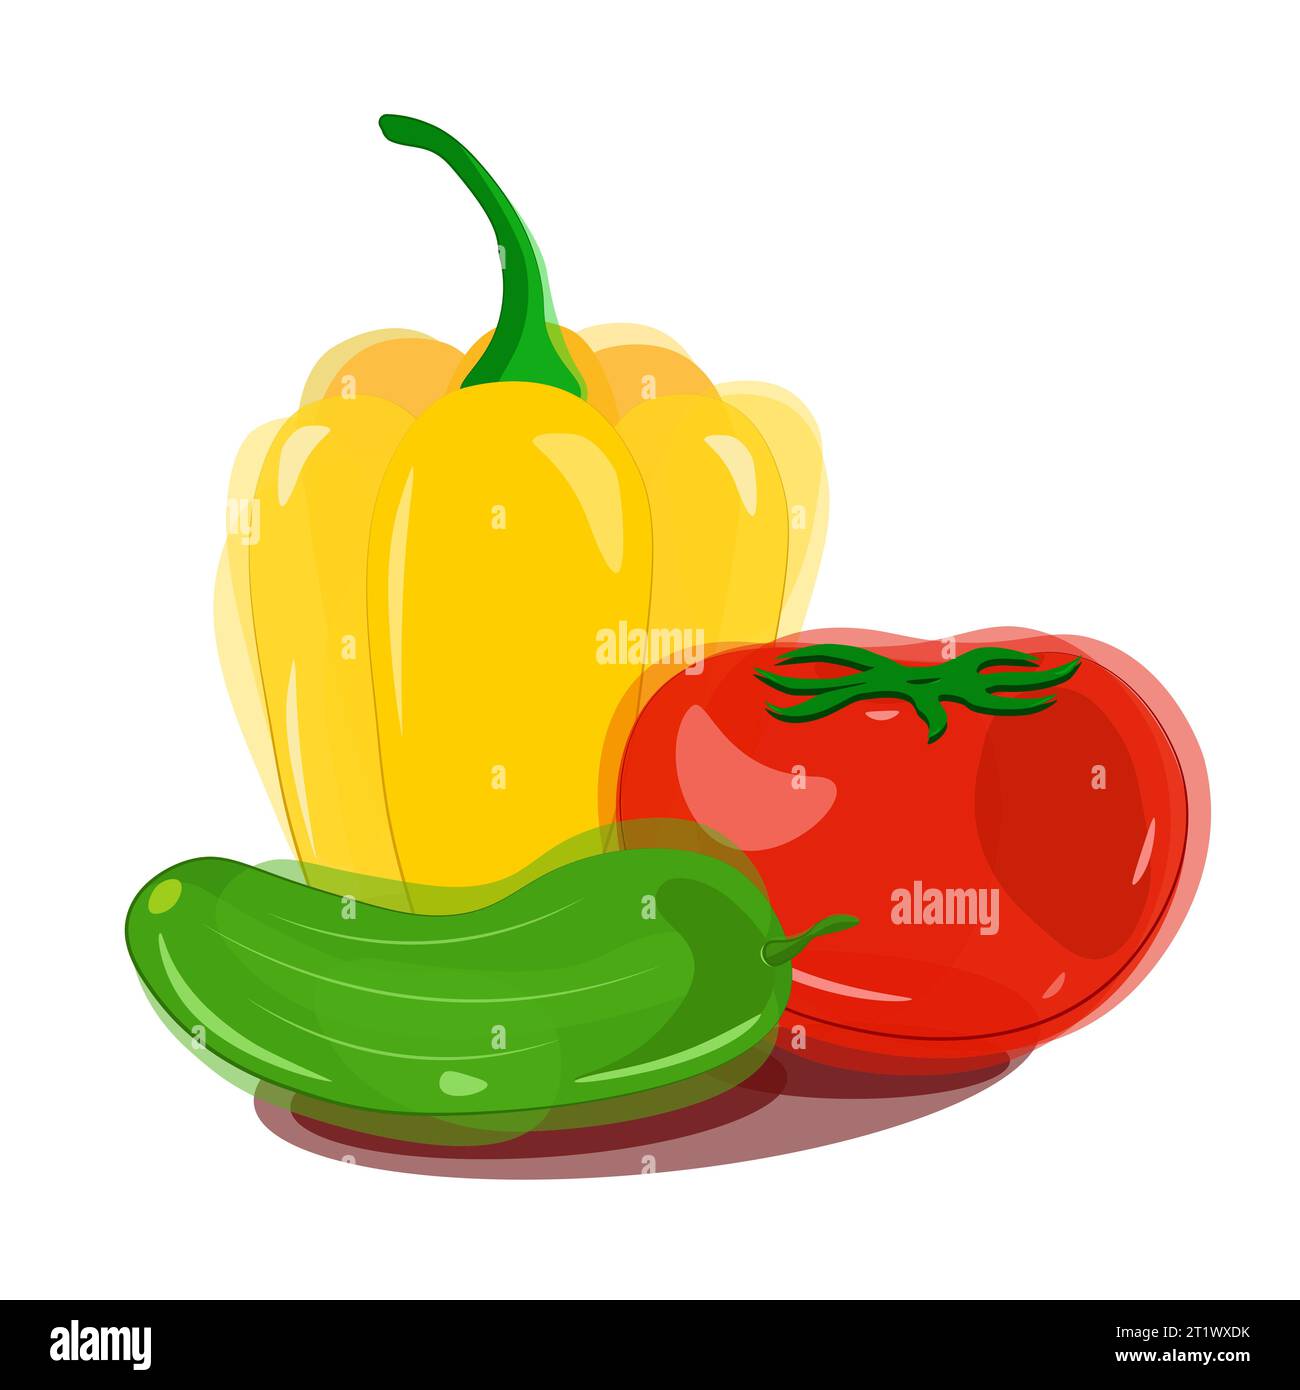 Yellow bell pepper with green tail and lying next to red tomato with green tail and green cucumber in watercolor style. Flares and shadows. Vector Stock Vector